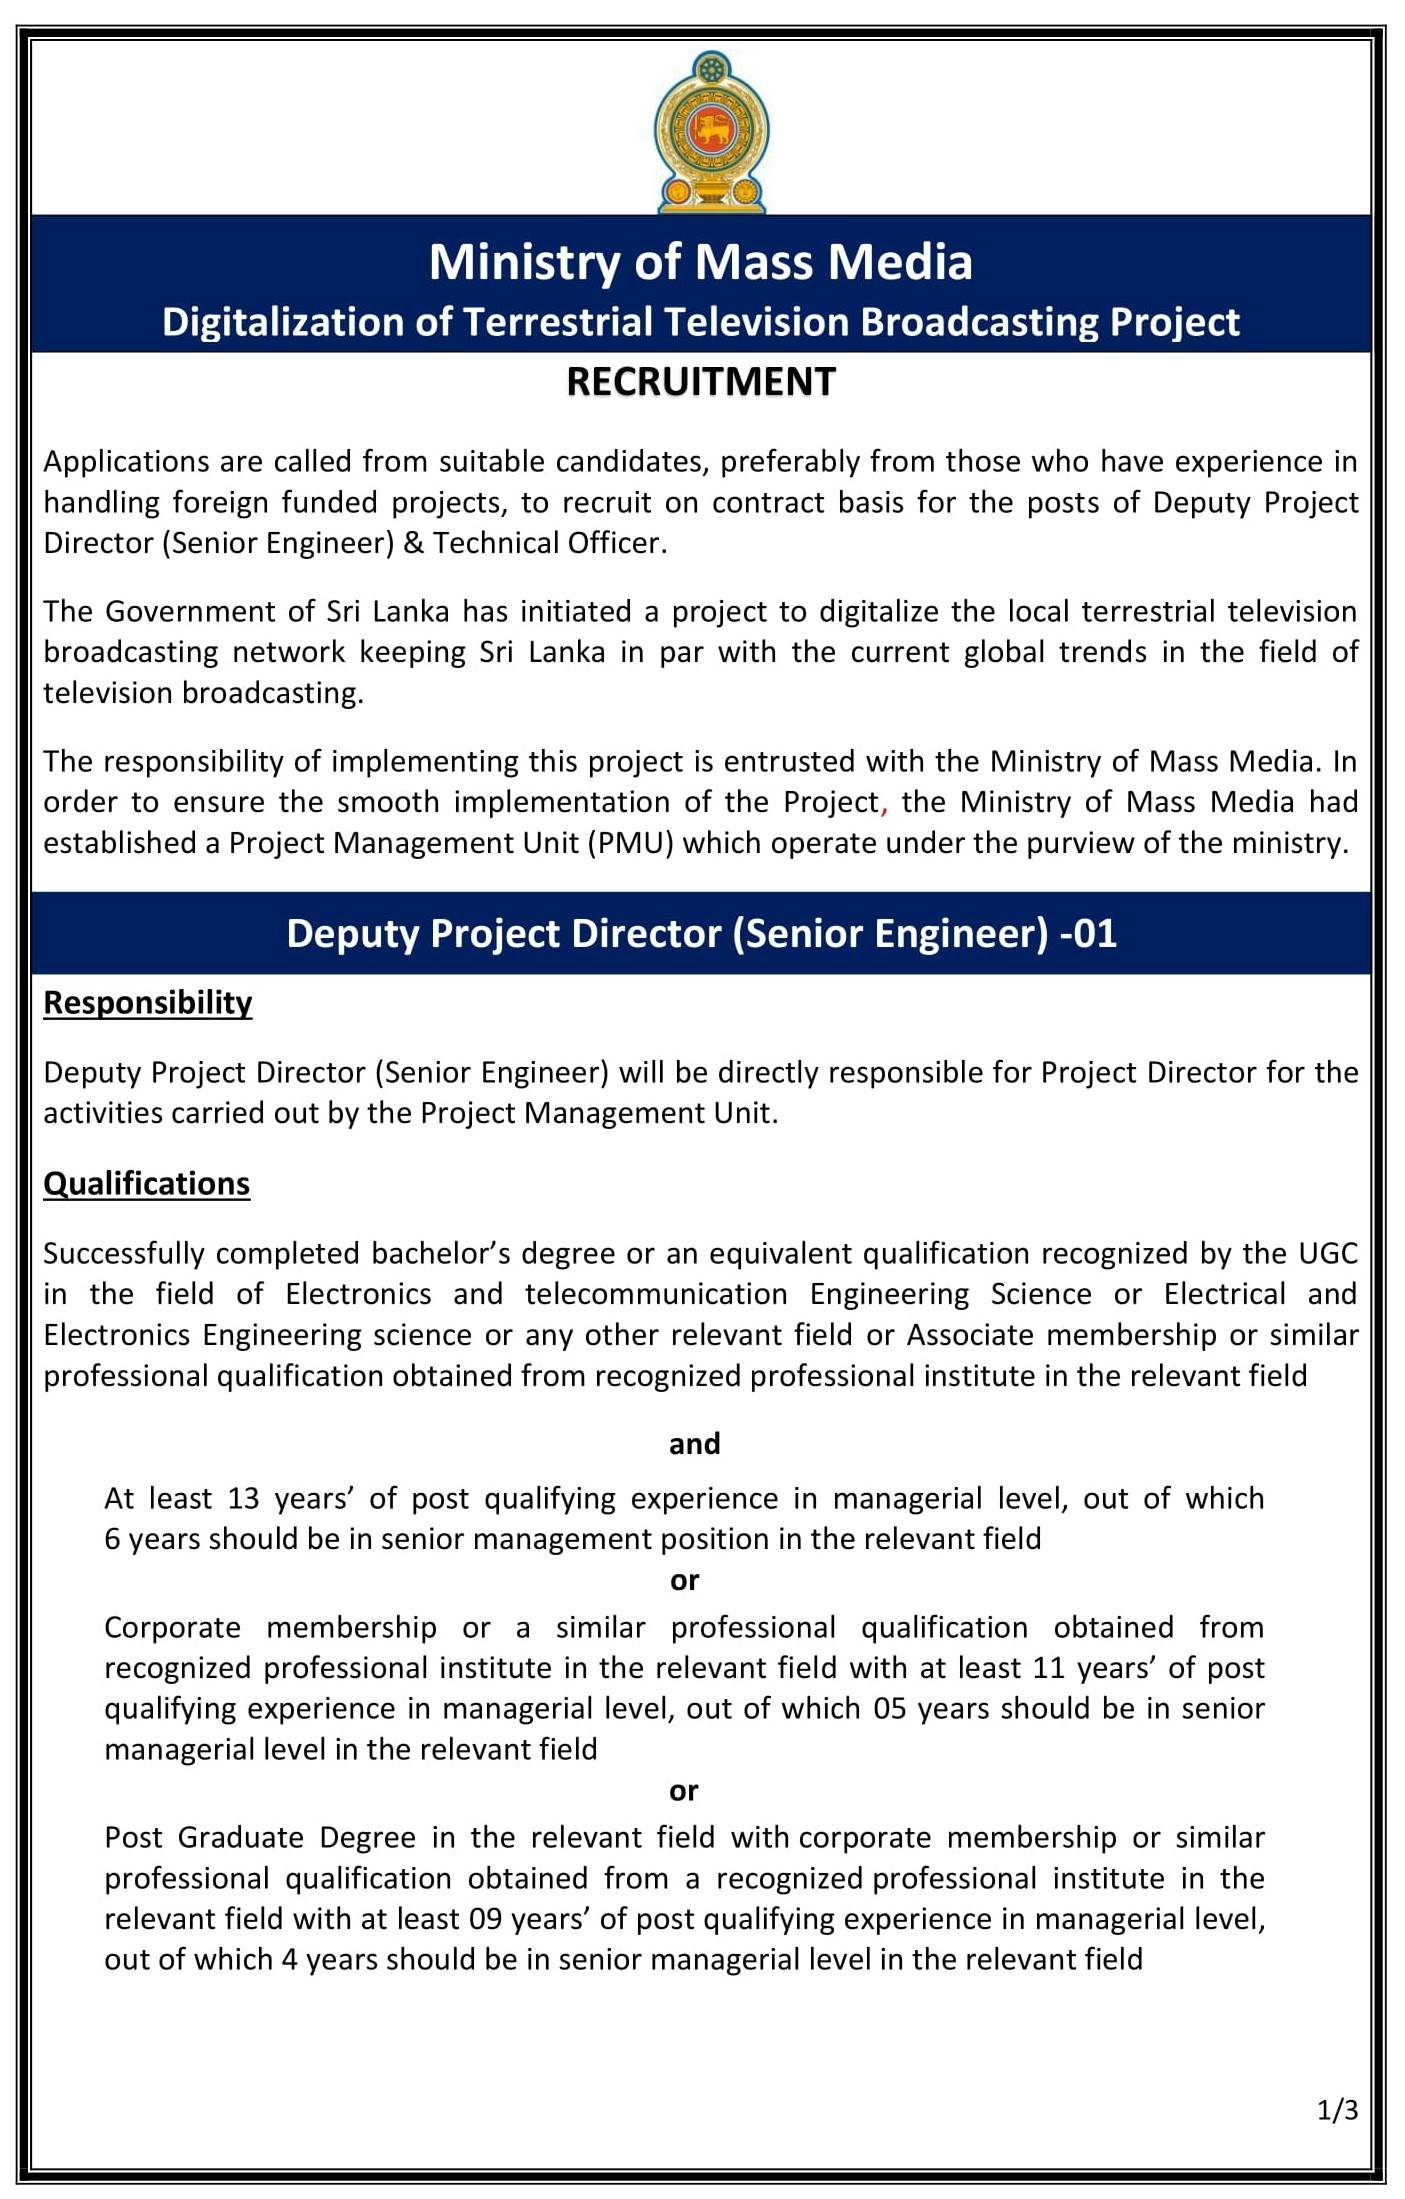 Deputy Project Director, Technical Officer - Ministry of Mass Media English